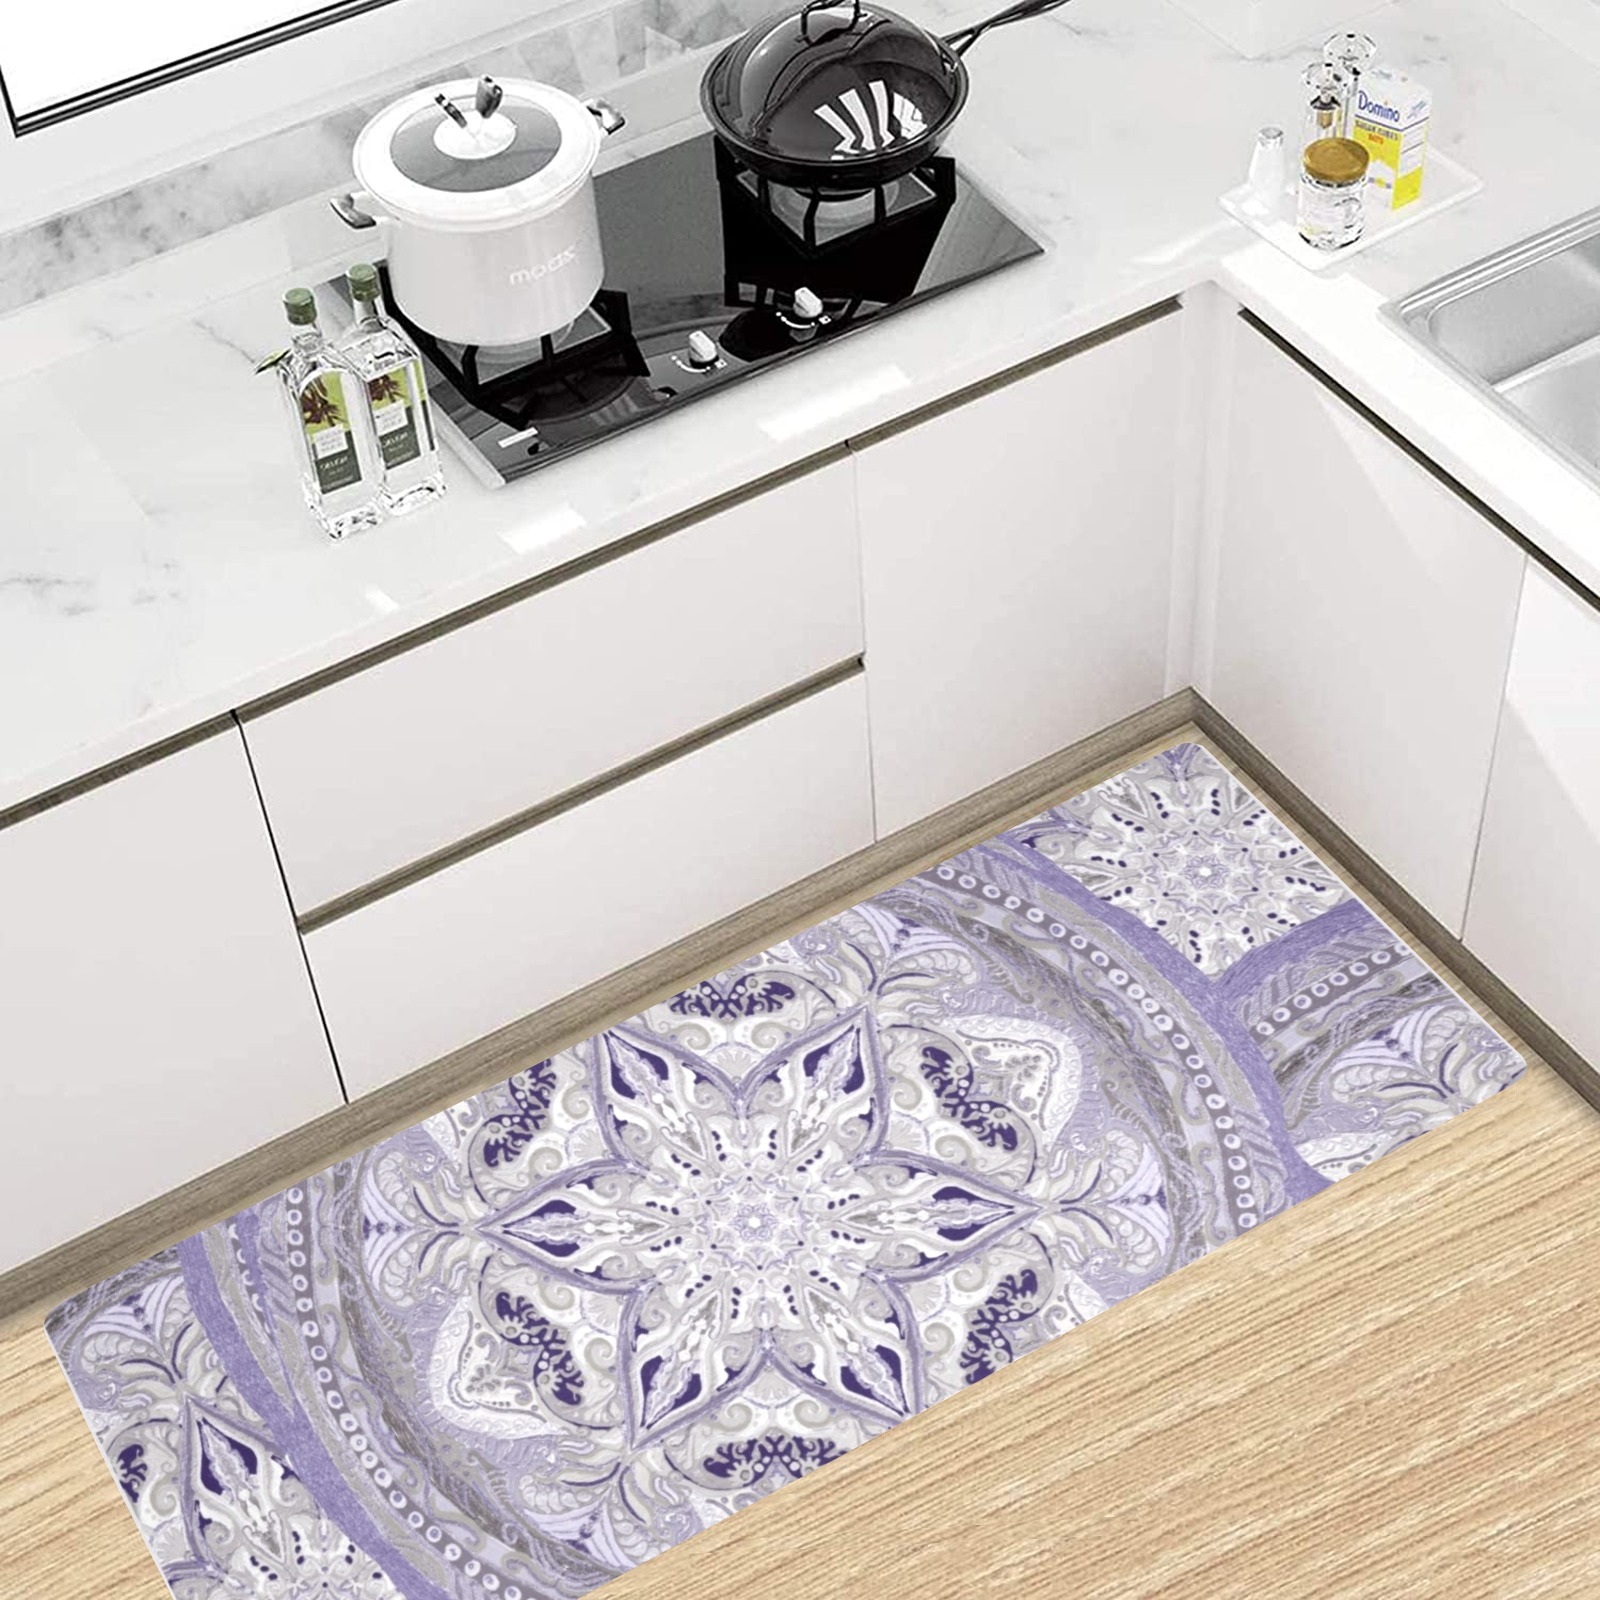 embroidery-pale purple and beige Kitchen Mat 48"x17"